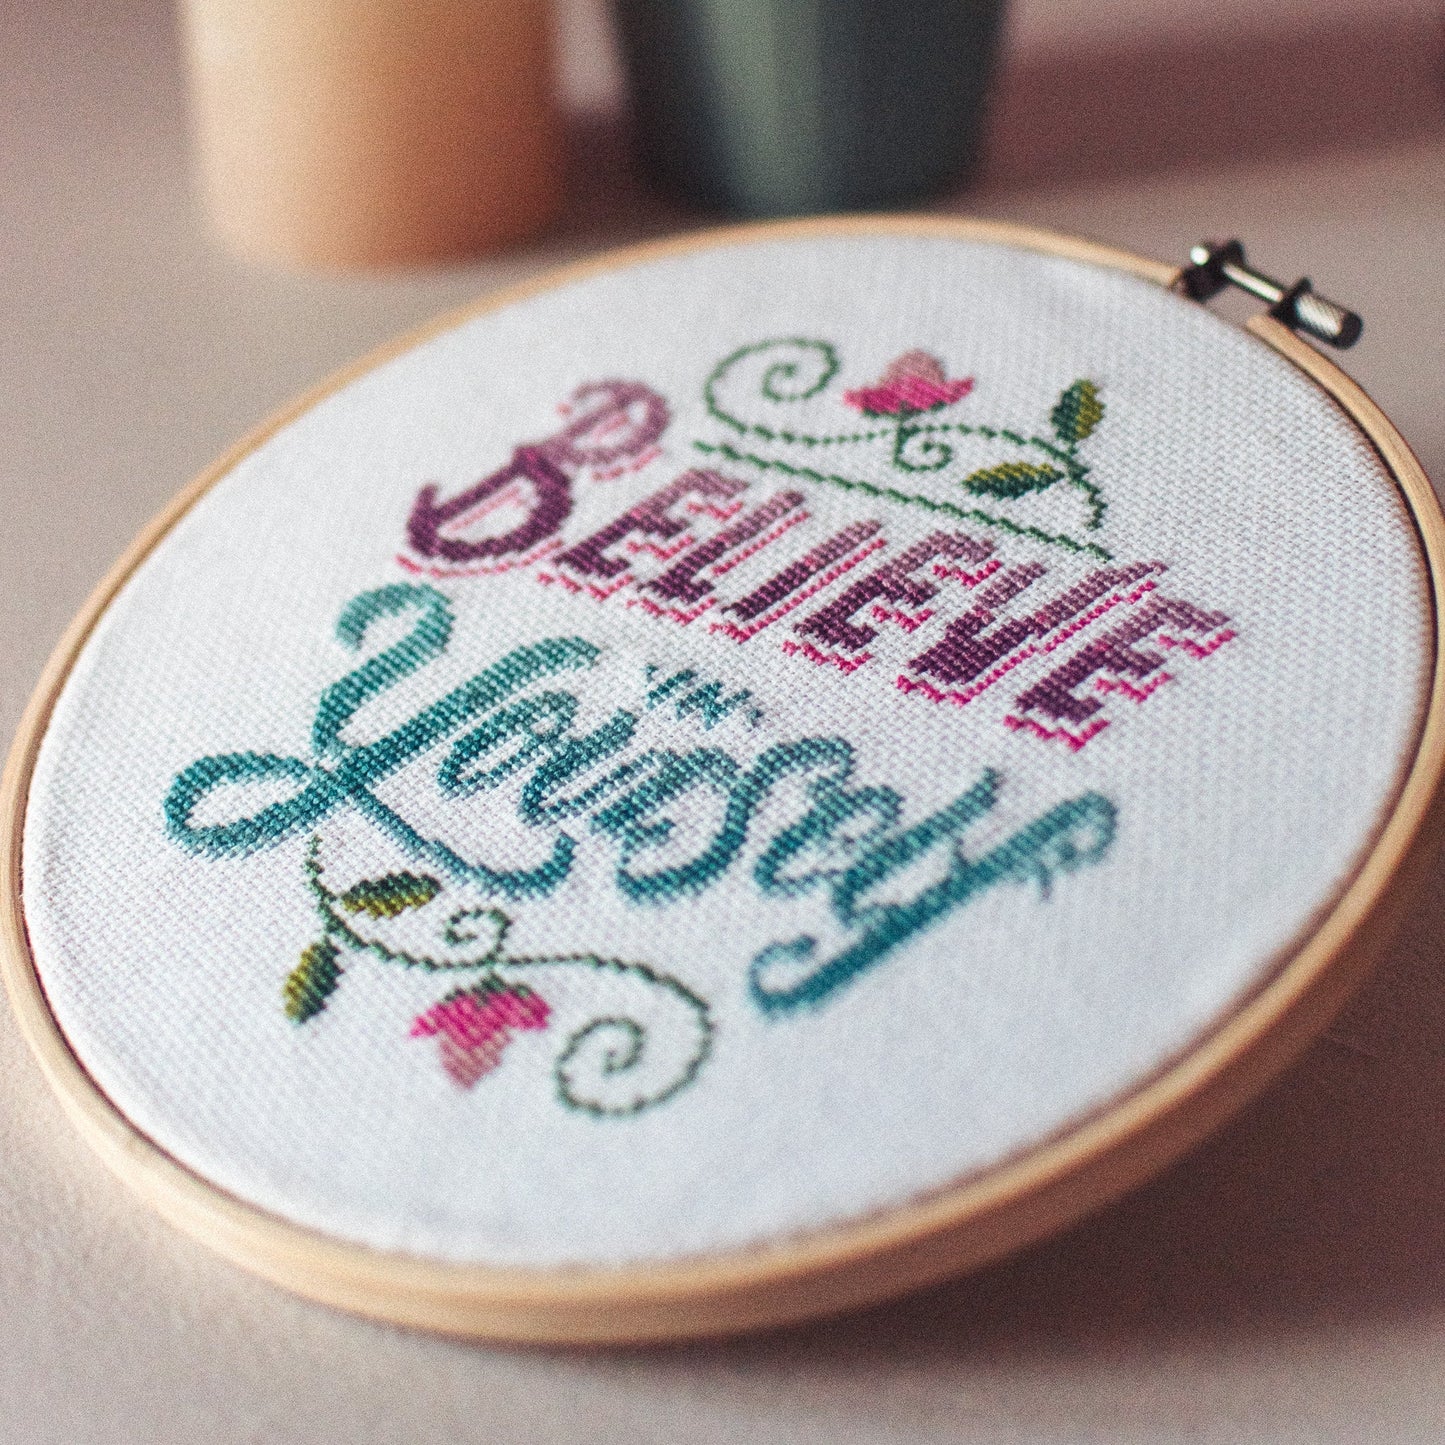 Completed Cross Stitch Art "Believe in Yourself" - F&B Crafts - F&B Crafts